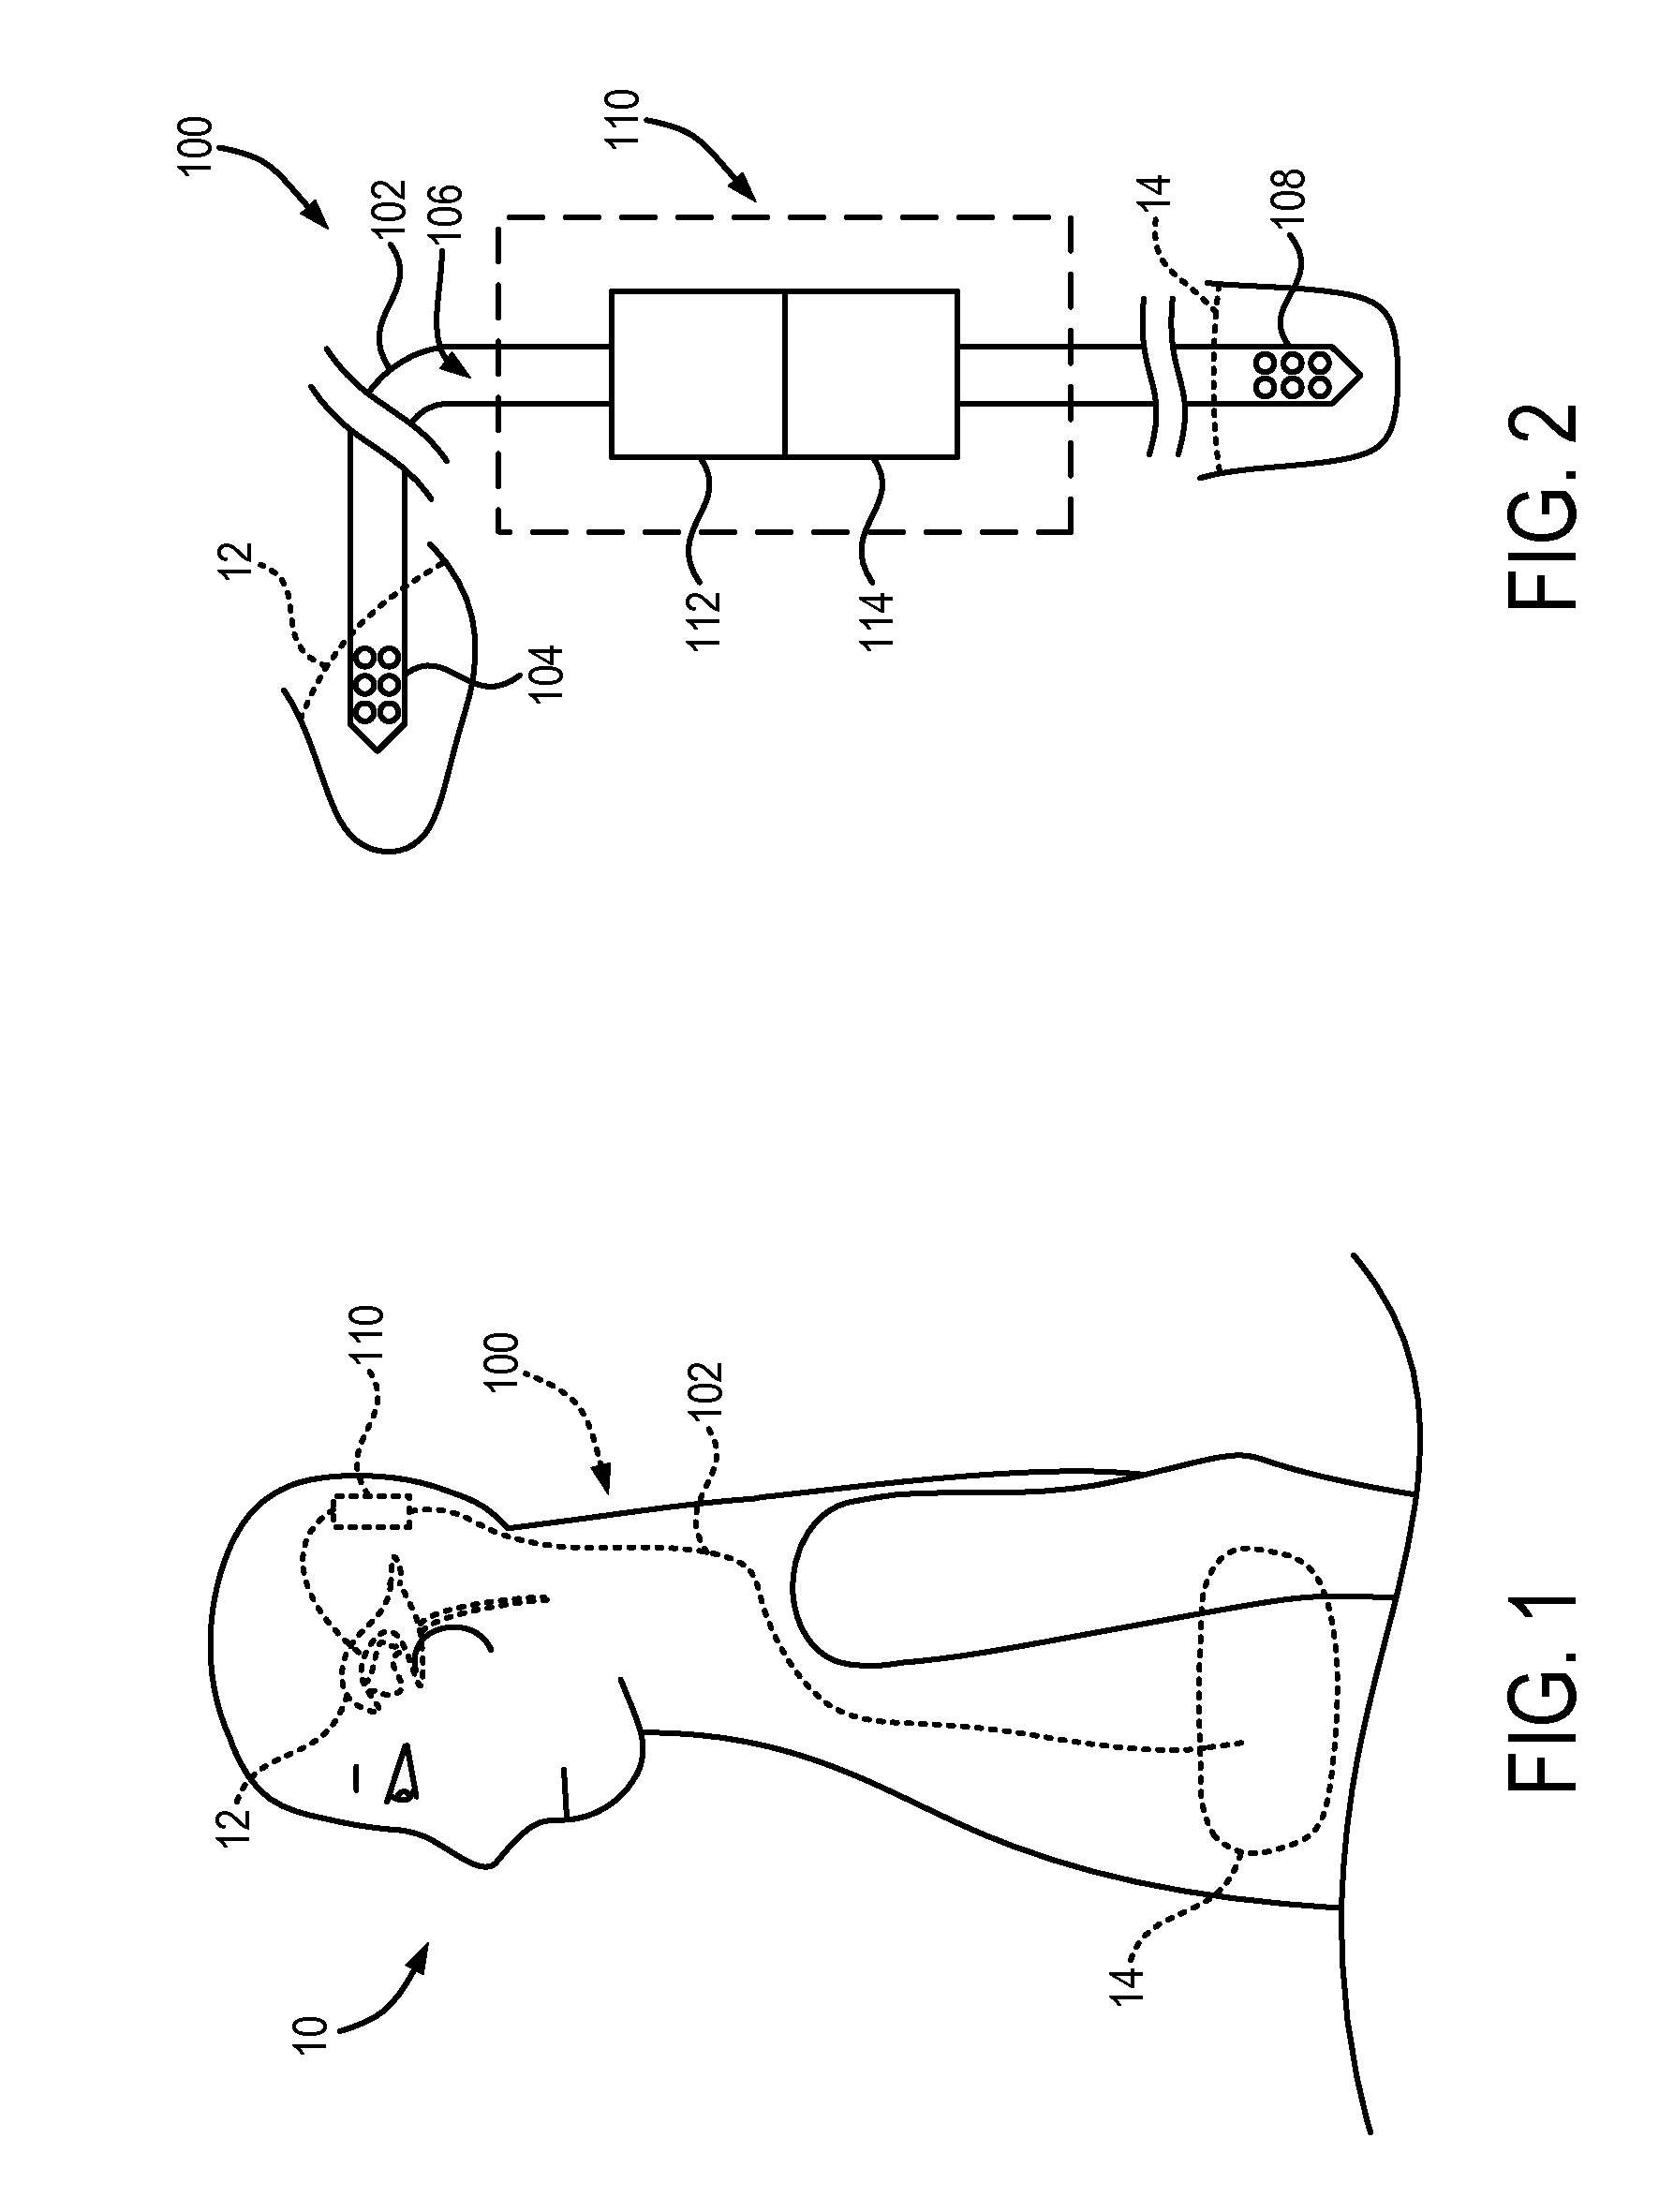 Systems and Methods for Controlling Cerebrospinal Fluid in a Subject's Ventricular System